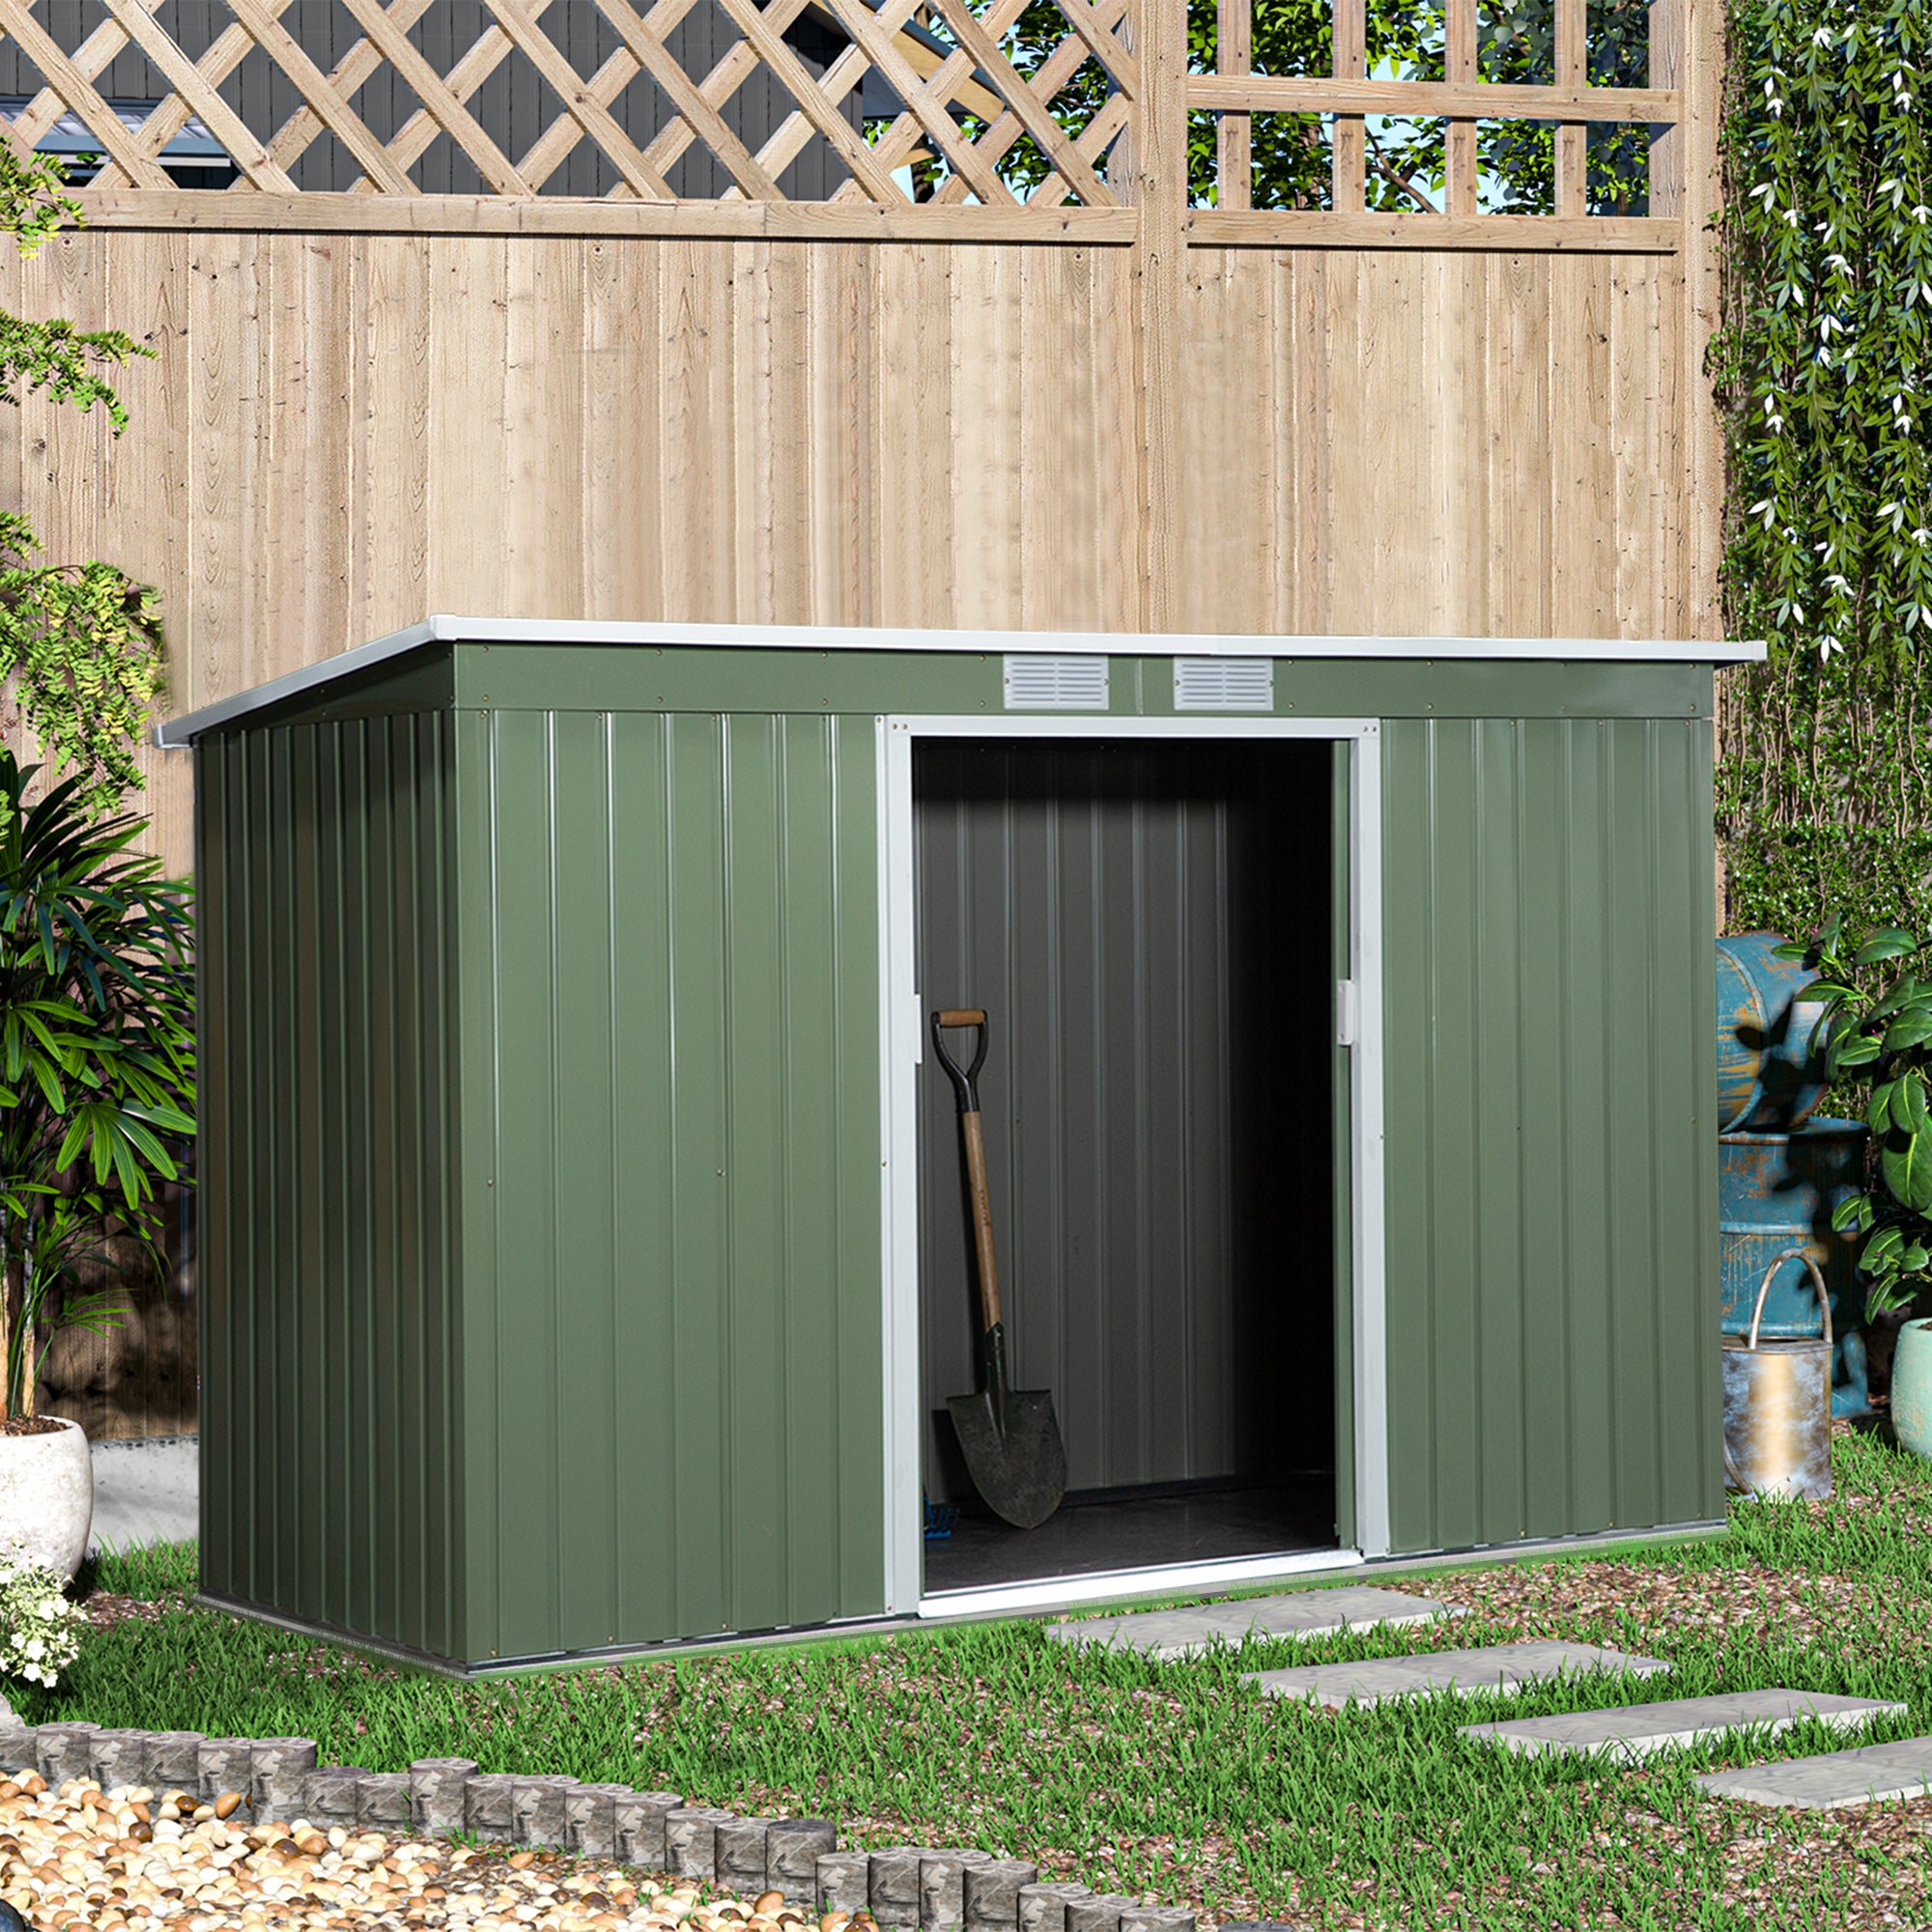 Outsunny 9 x 4.5 ft Pent Roof Metal Garden Storage Shed Corrugated Steel Tool Box with Foundation Ventilation & Doors, Light Green - Inspirely